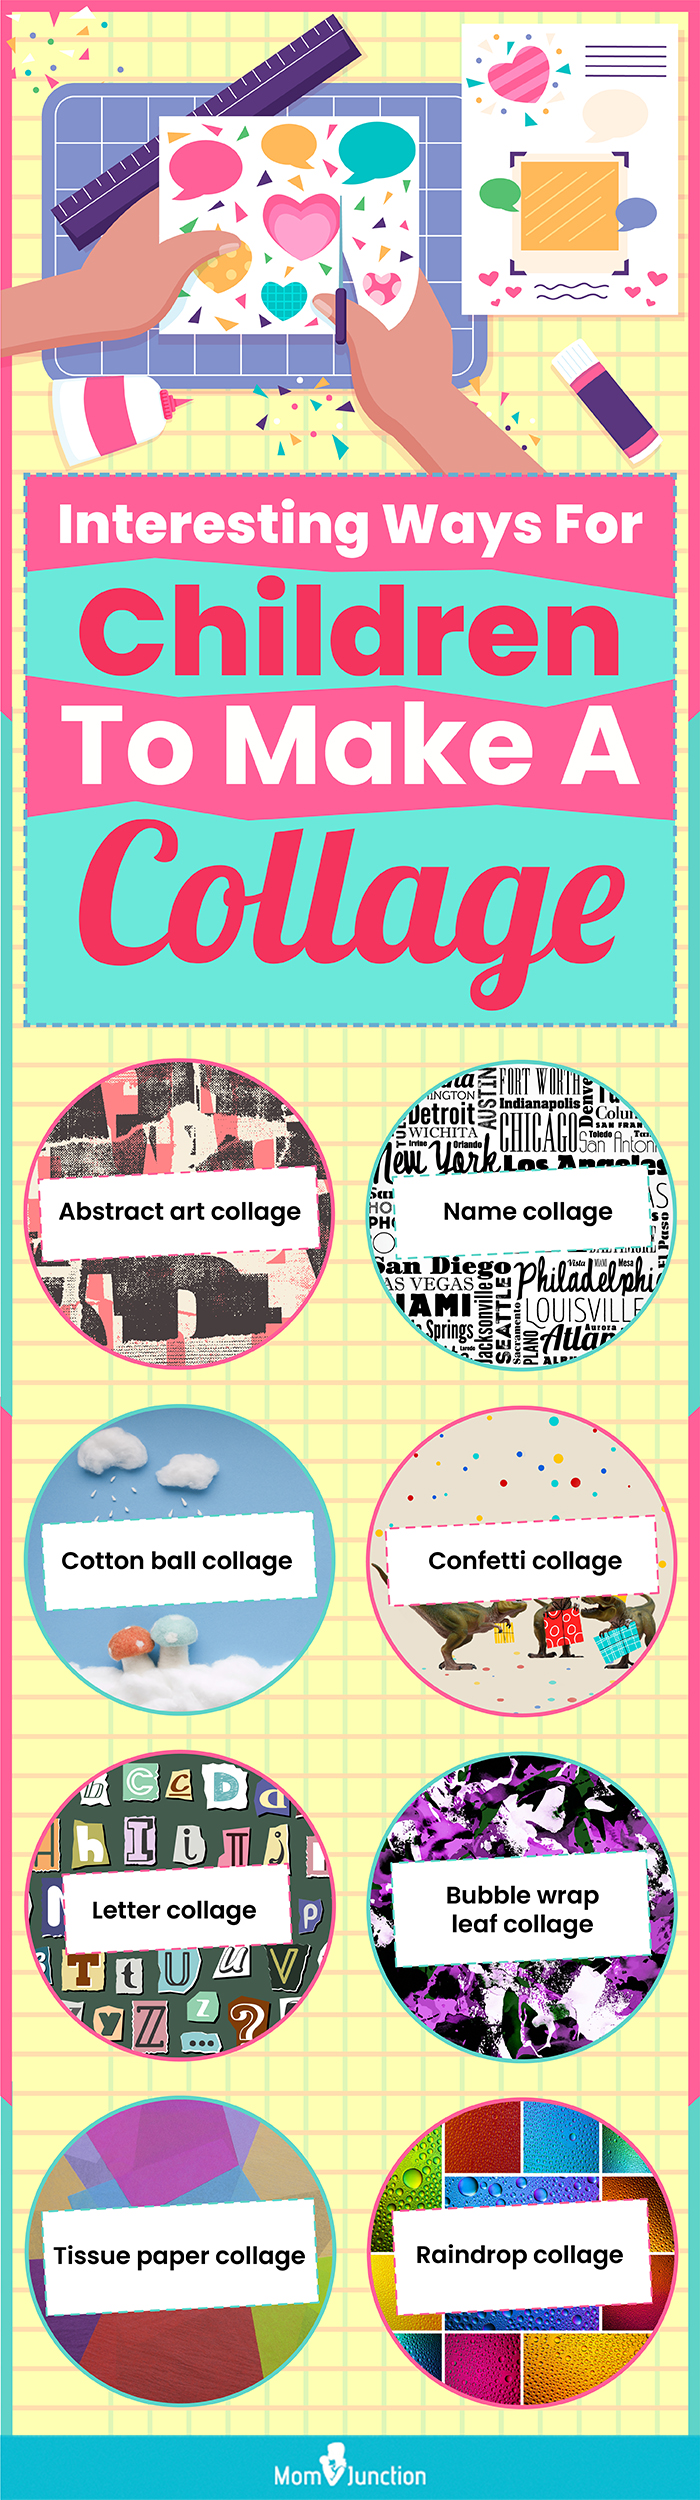 interesting waysfor children to make a collage (infographic)